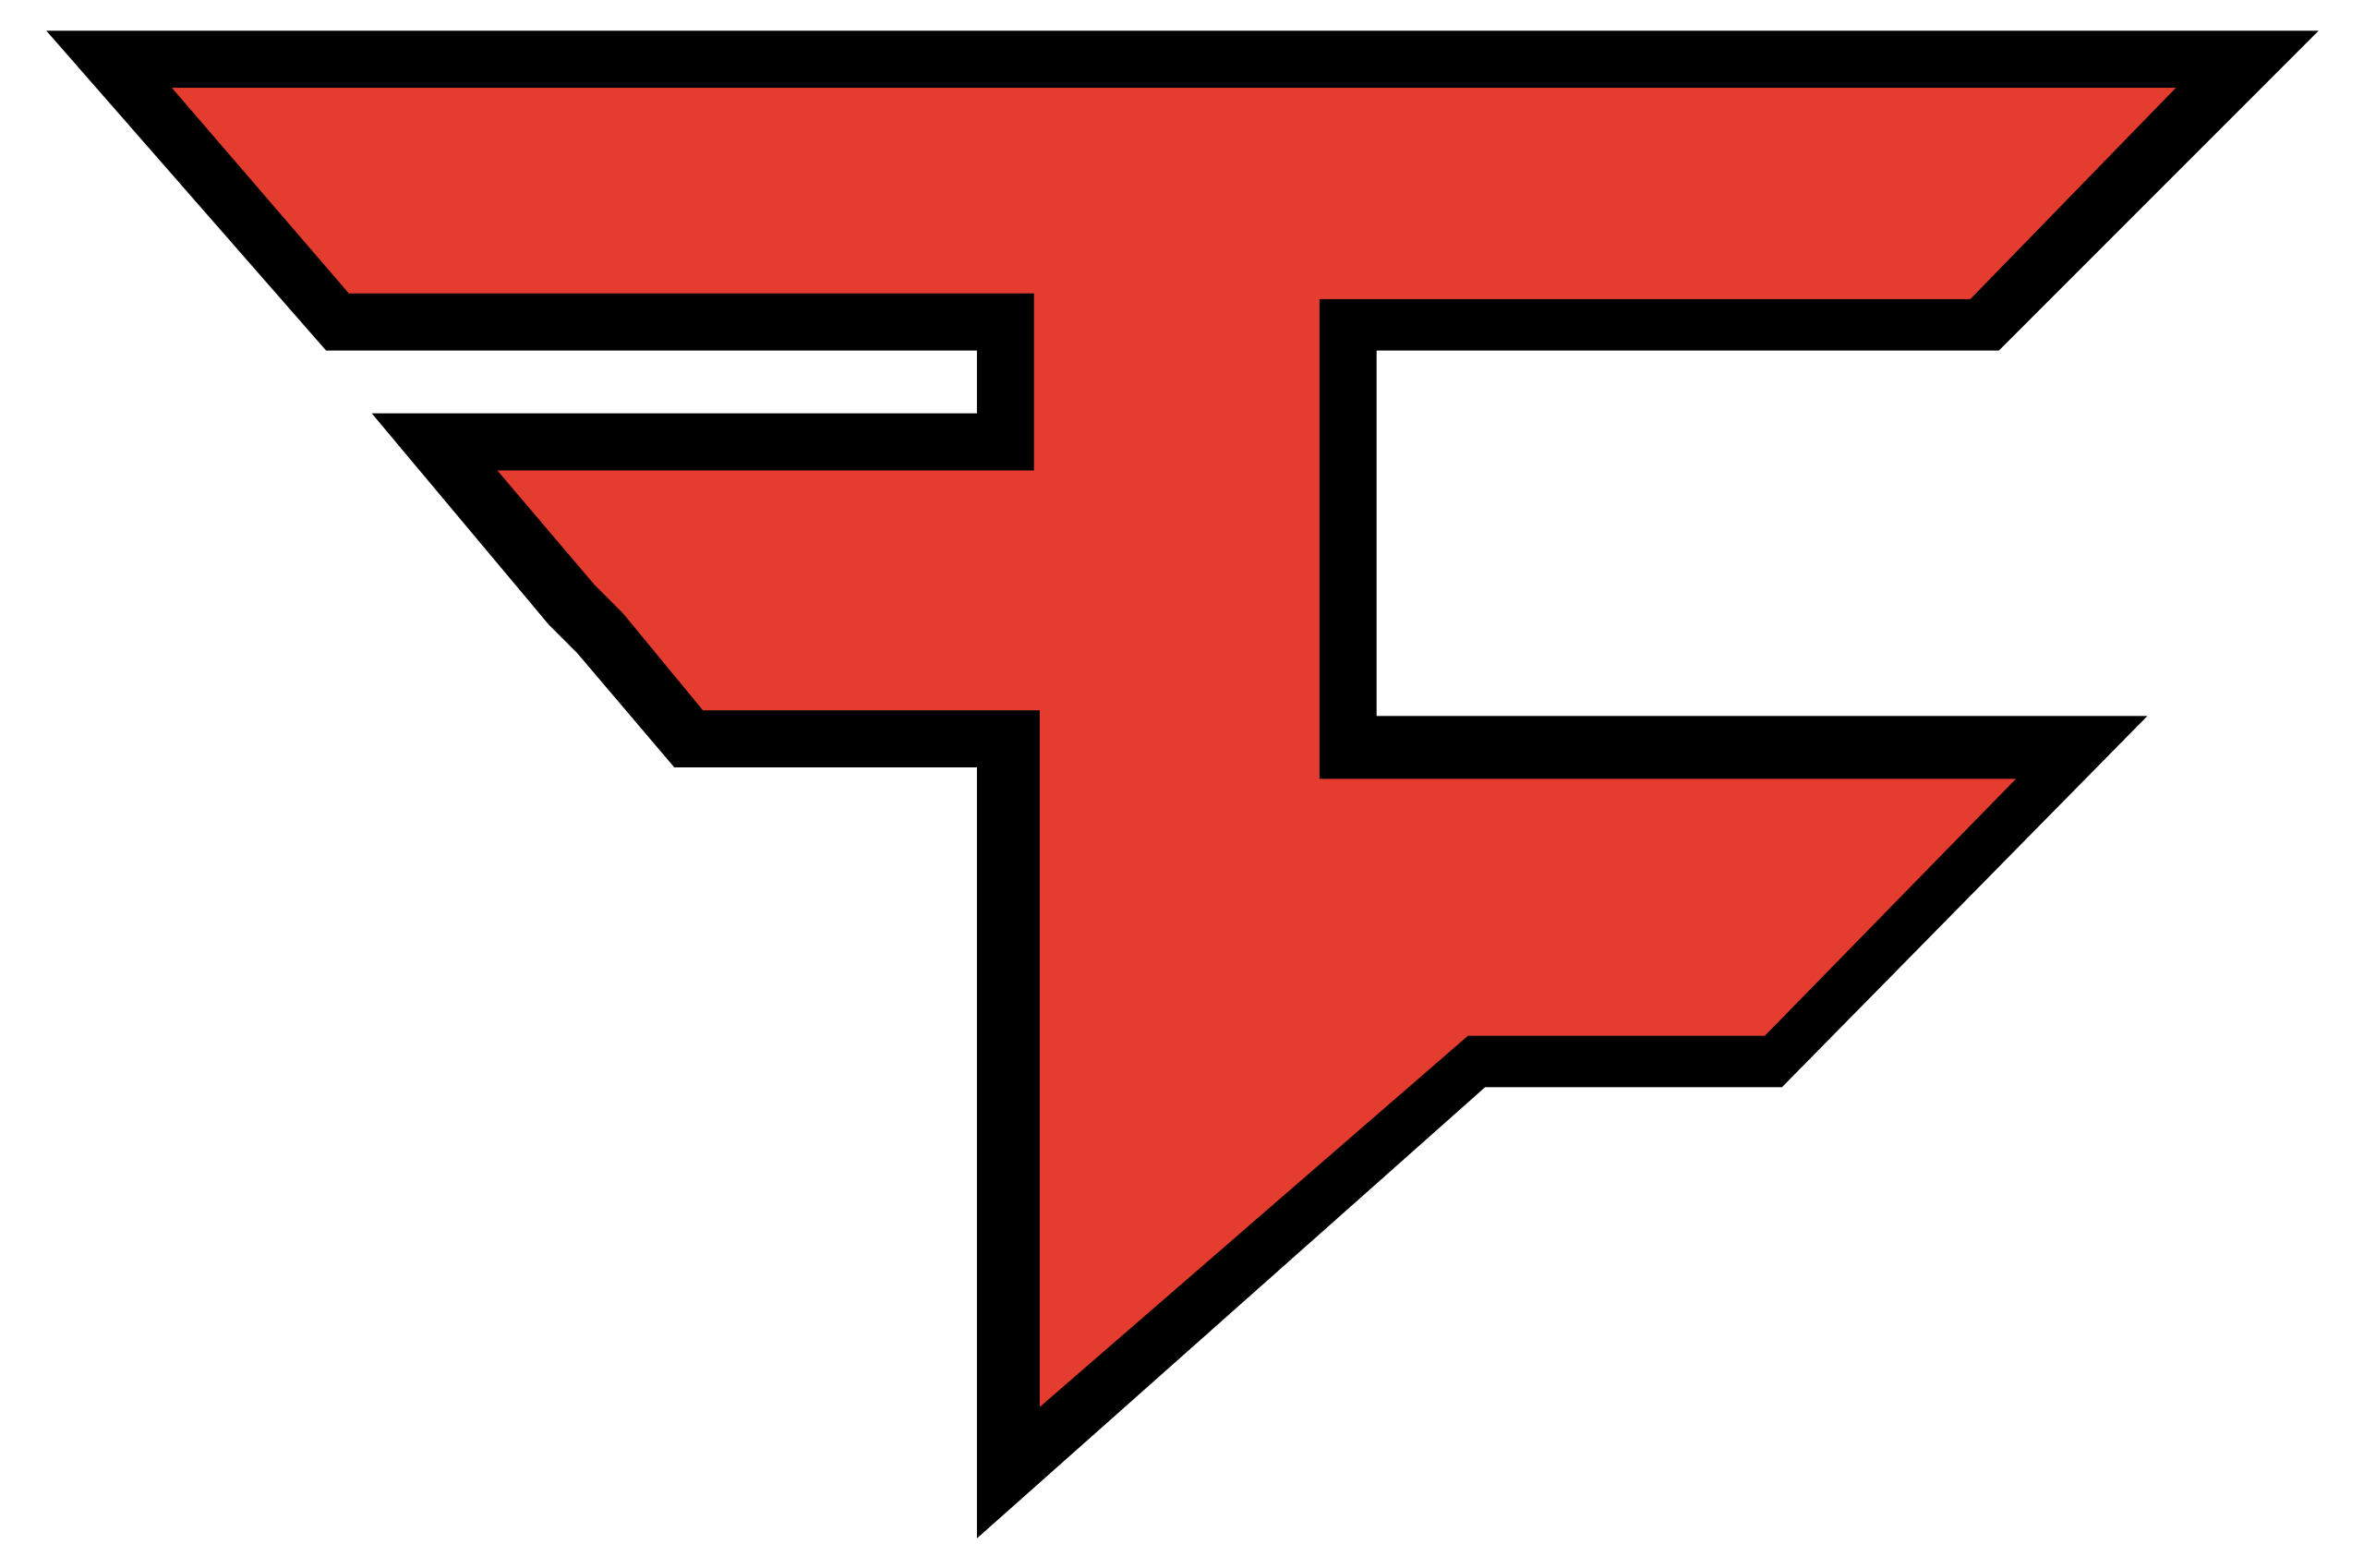 Faze Clan destroys its roster. Cuts half of the roster